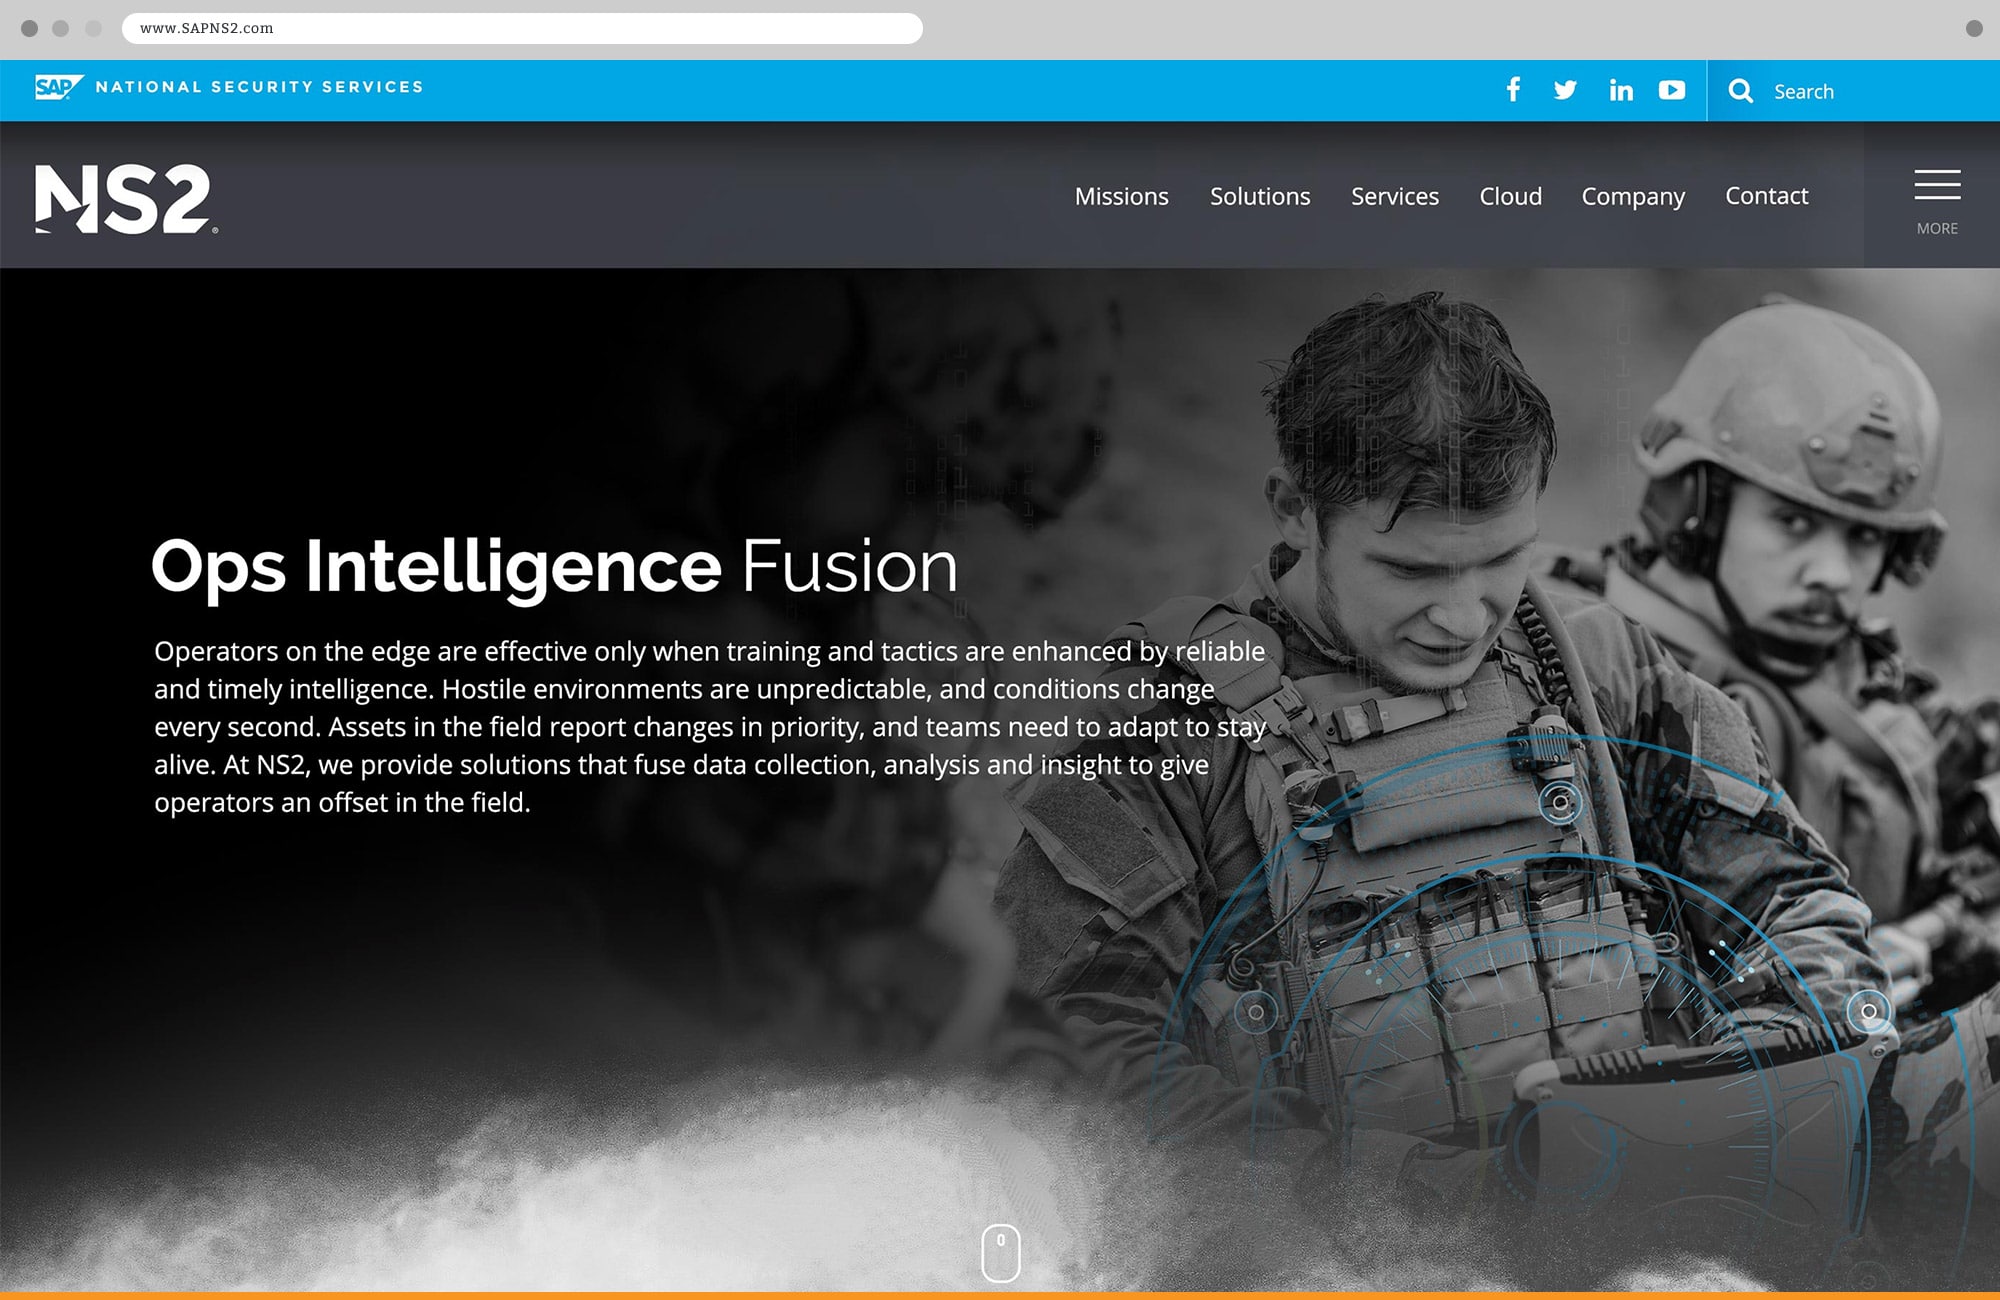 Punch - NS2 Website Ops Intelligence Fusion Page